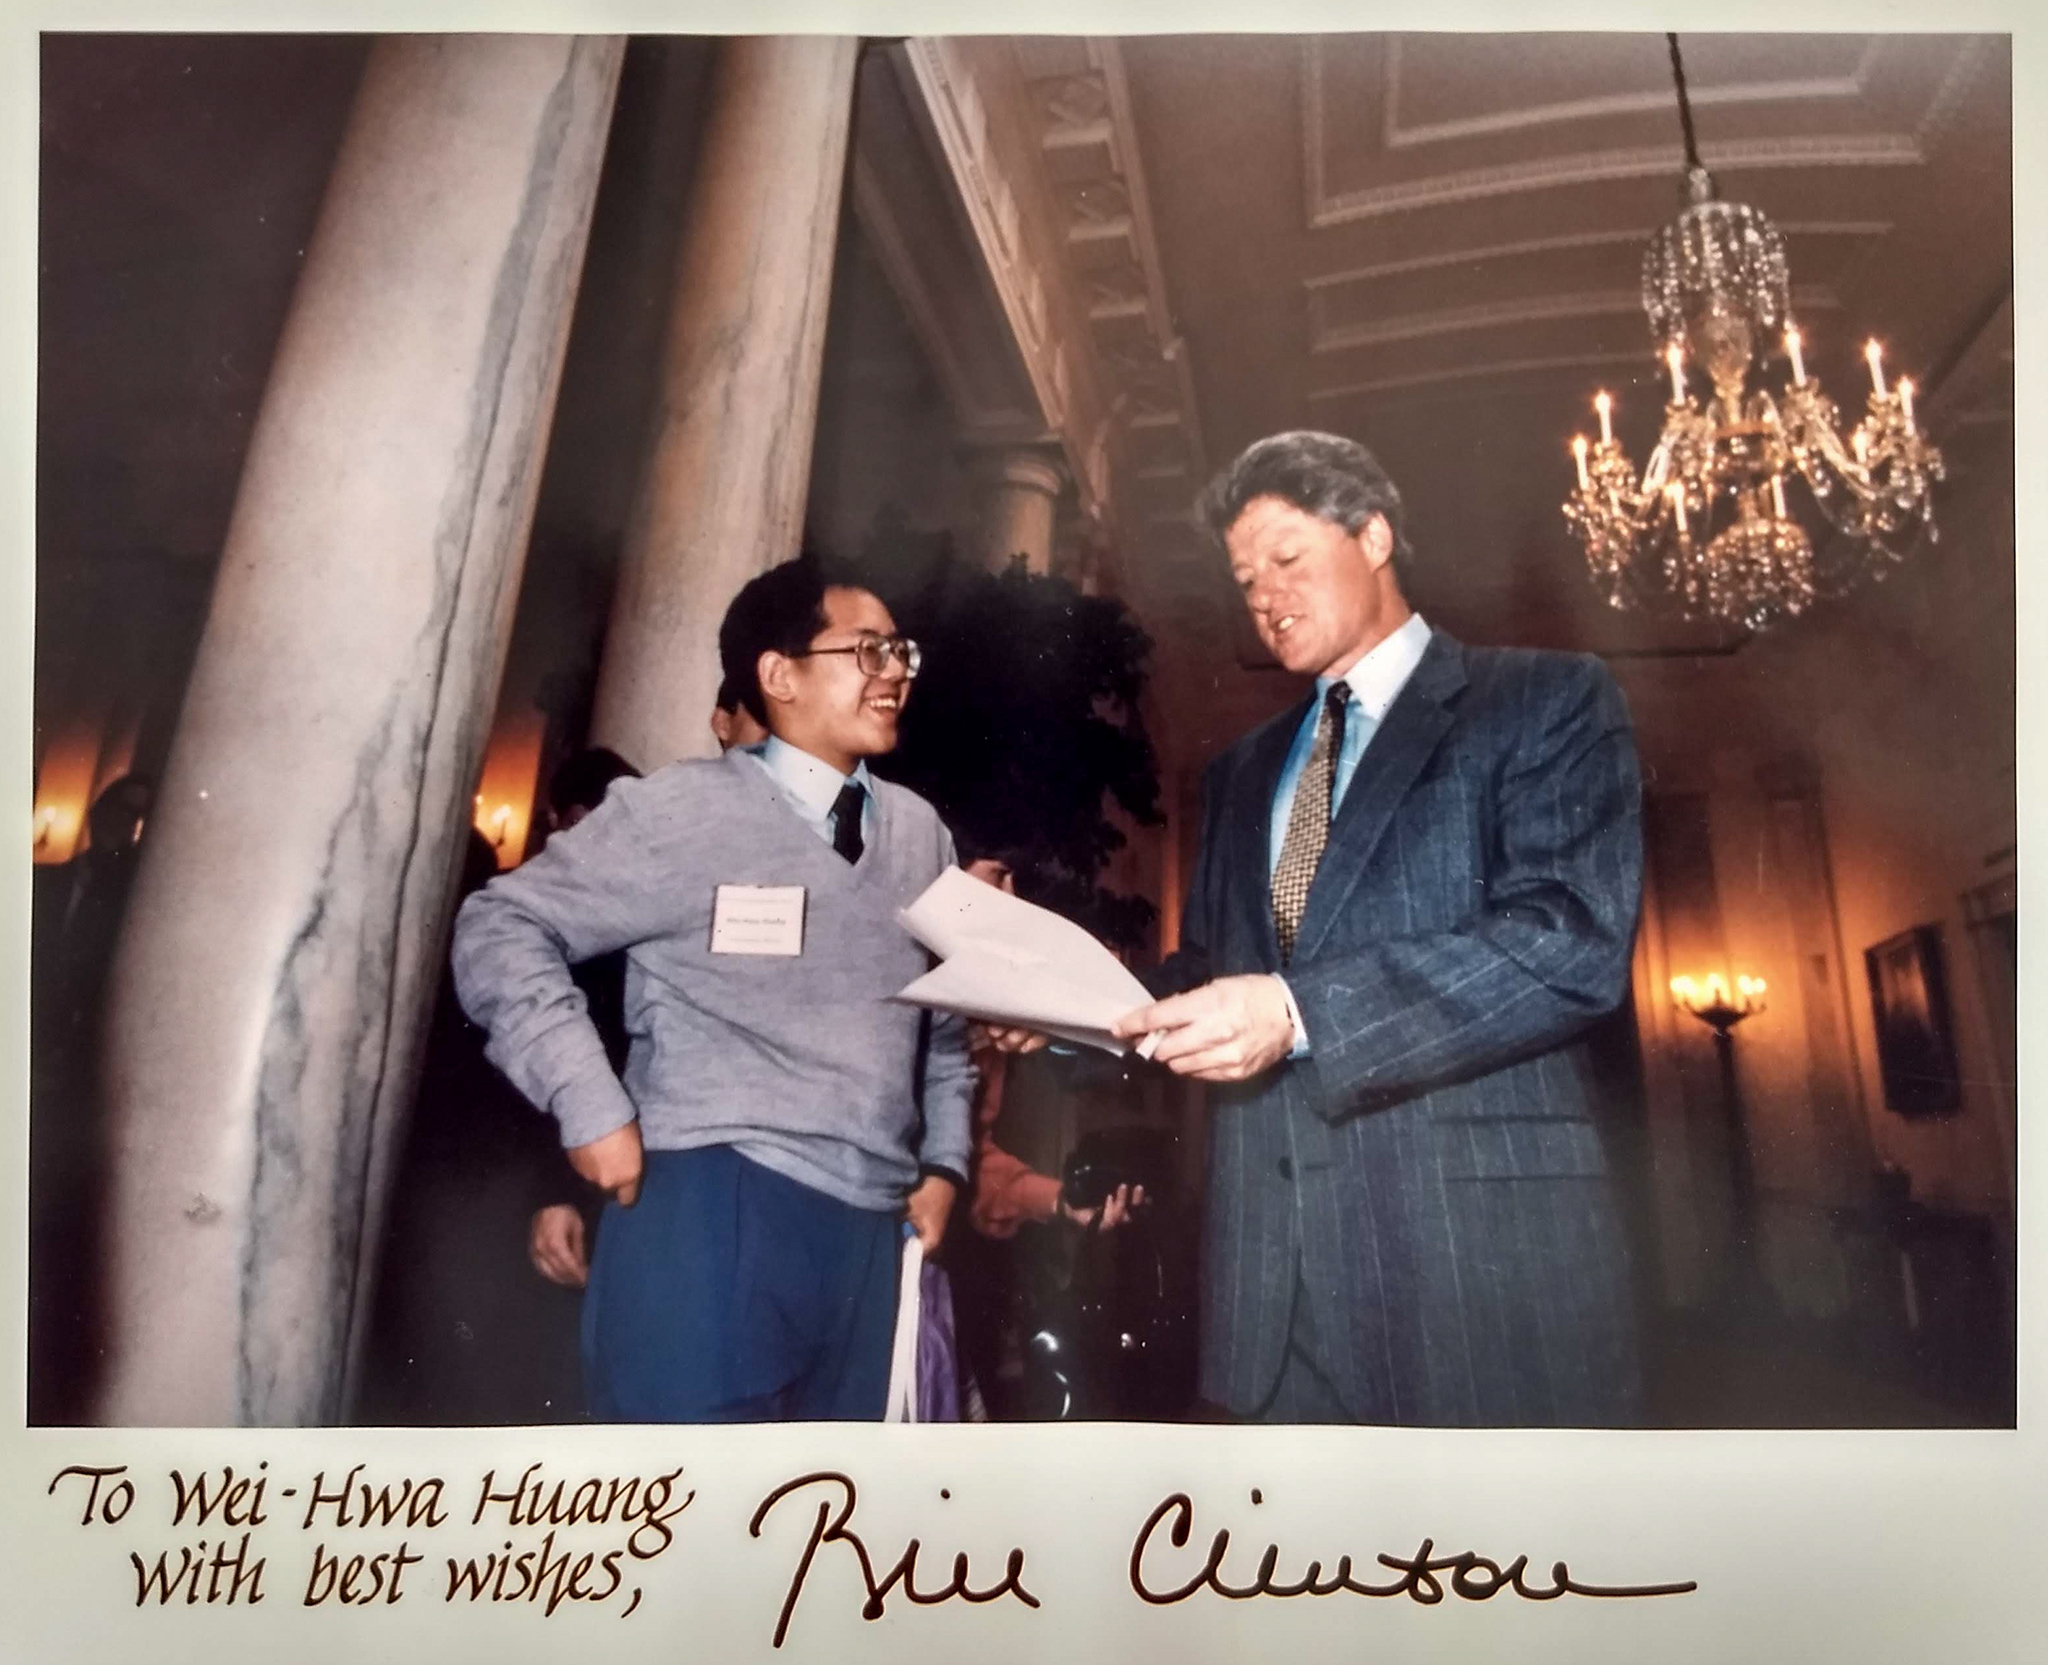 STS finalist Wei-Hwa Huang gives President Clinton a crossword puzzle